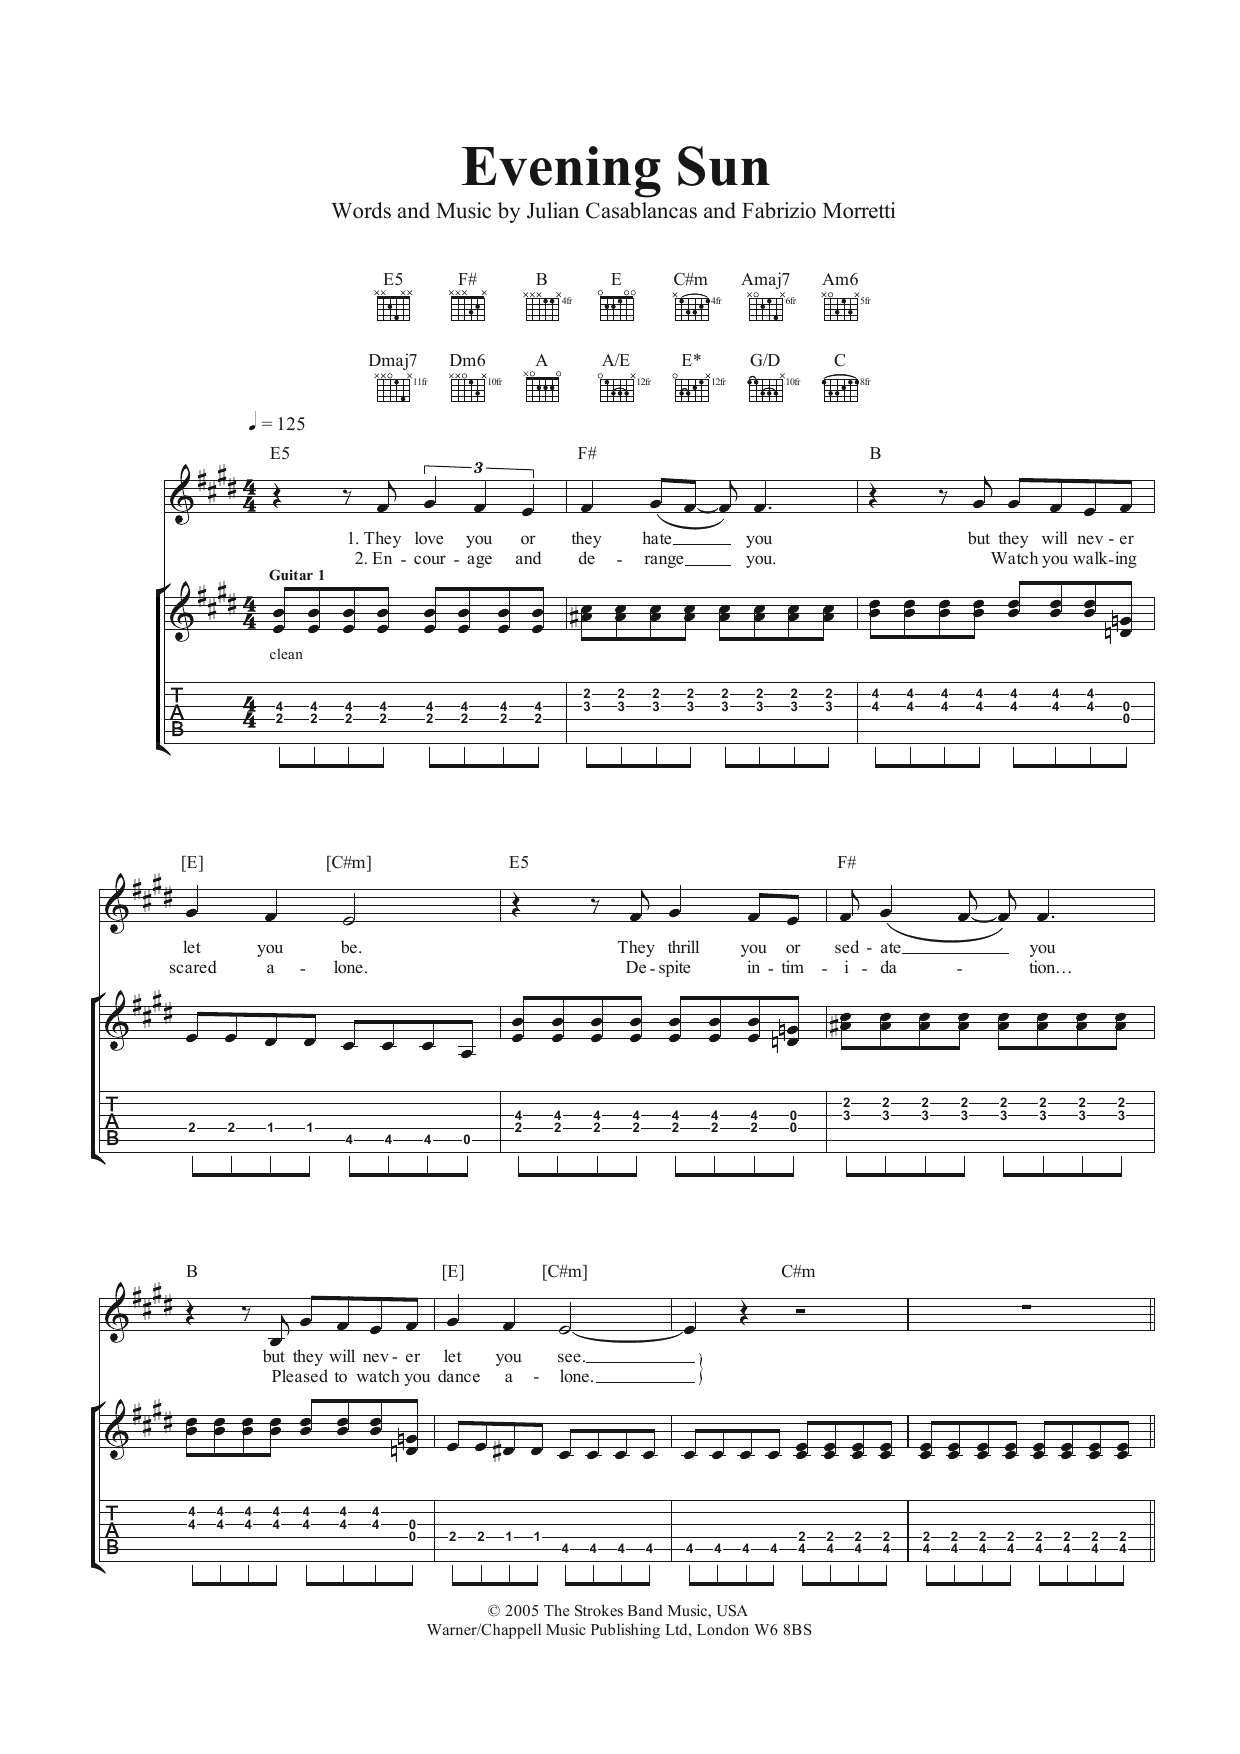 Download The Strokes Evening Sun Sheet Music